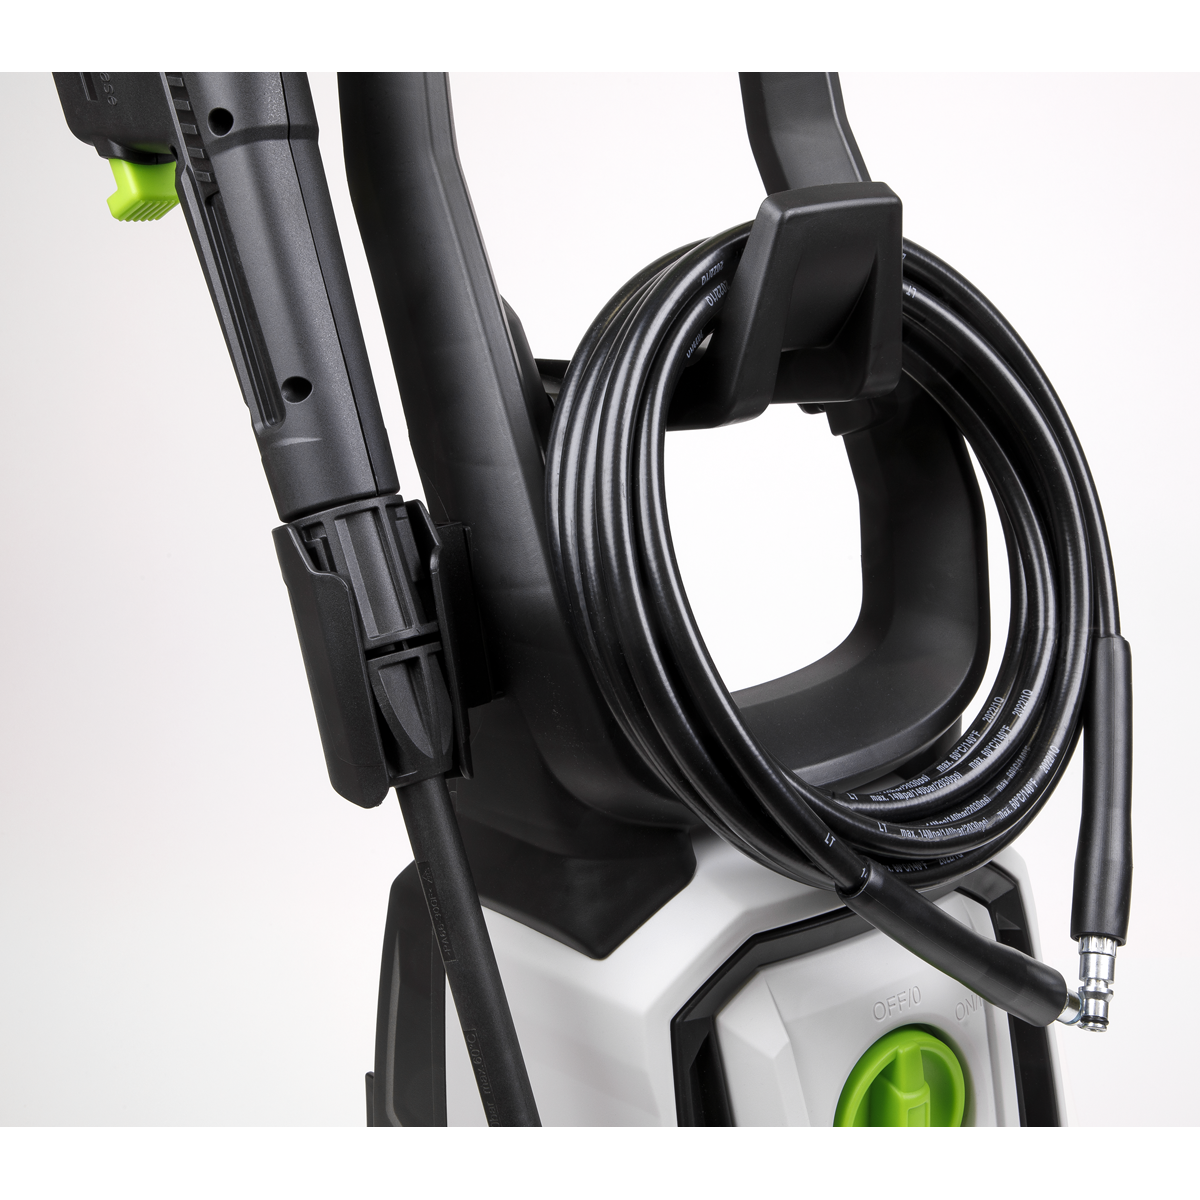 LONG REACH - Supplied with 5m pressurized hose for ease of use and 5m power cable for extended reach.